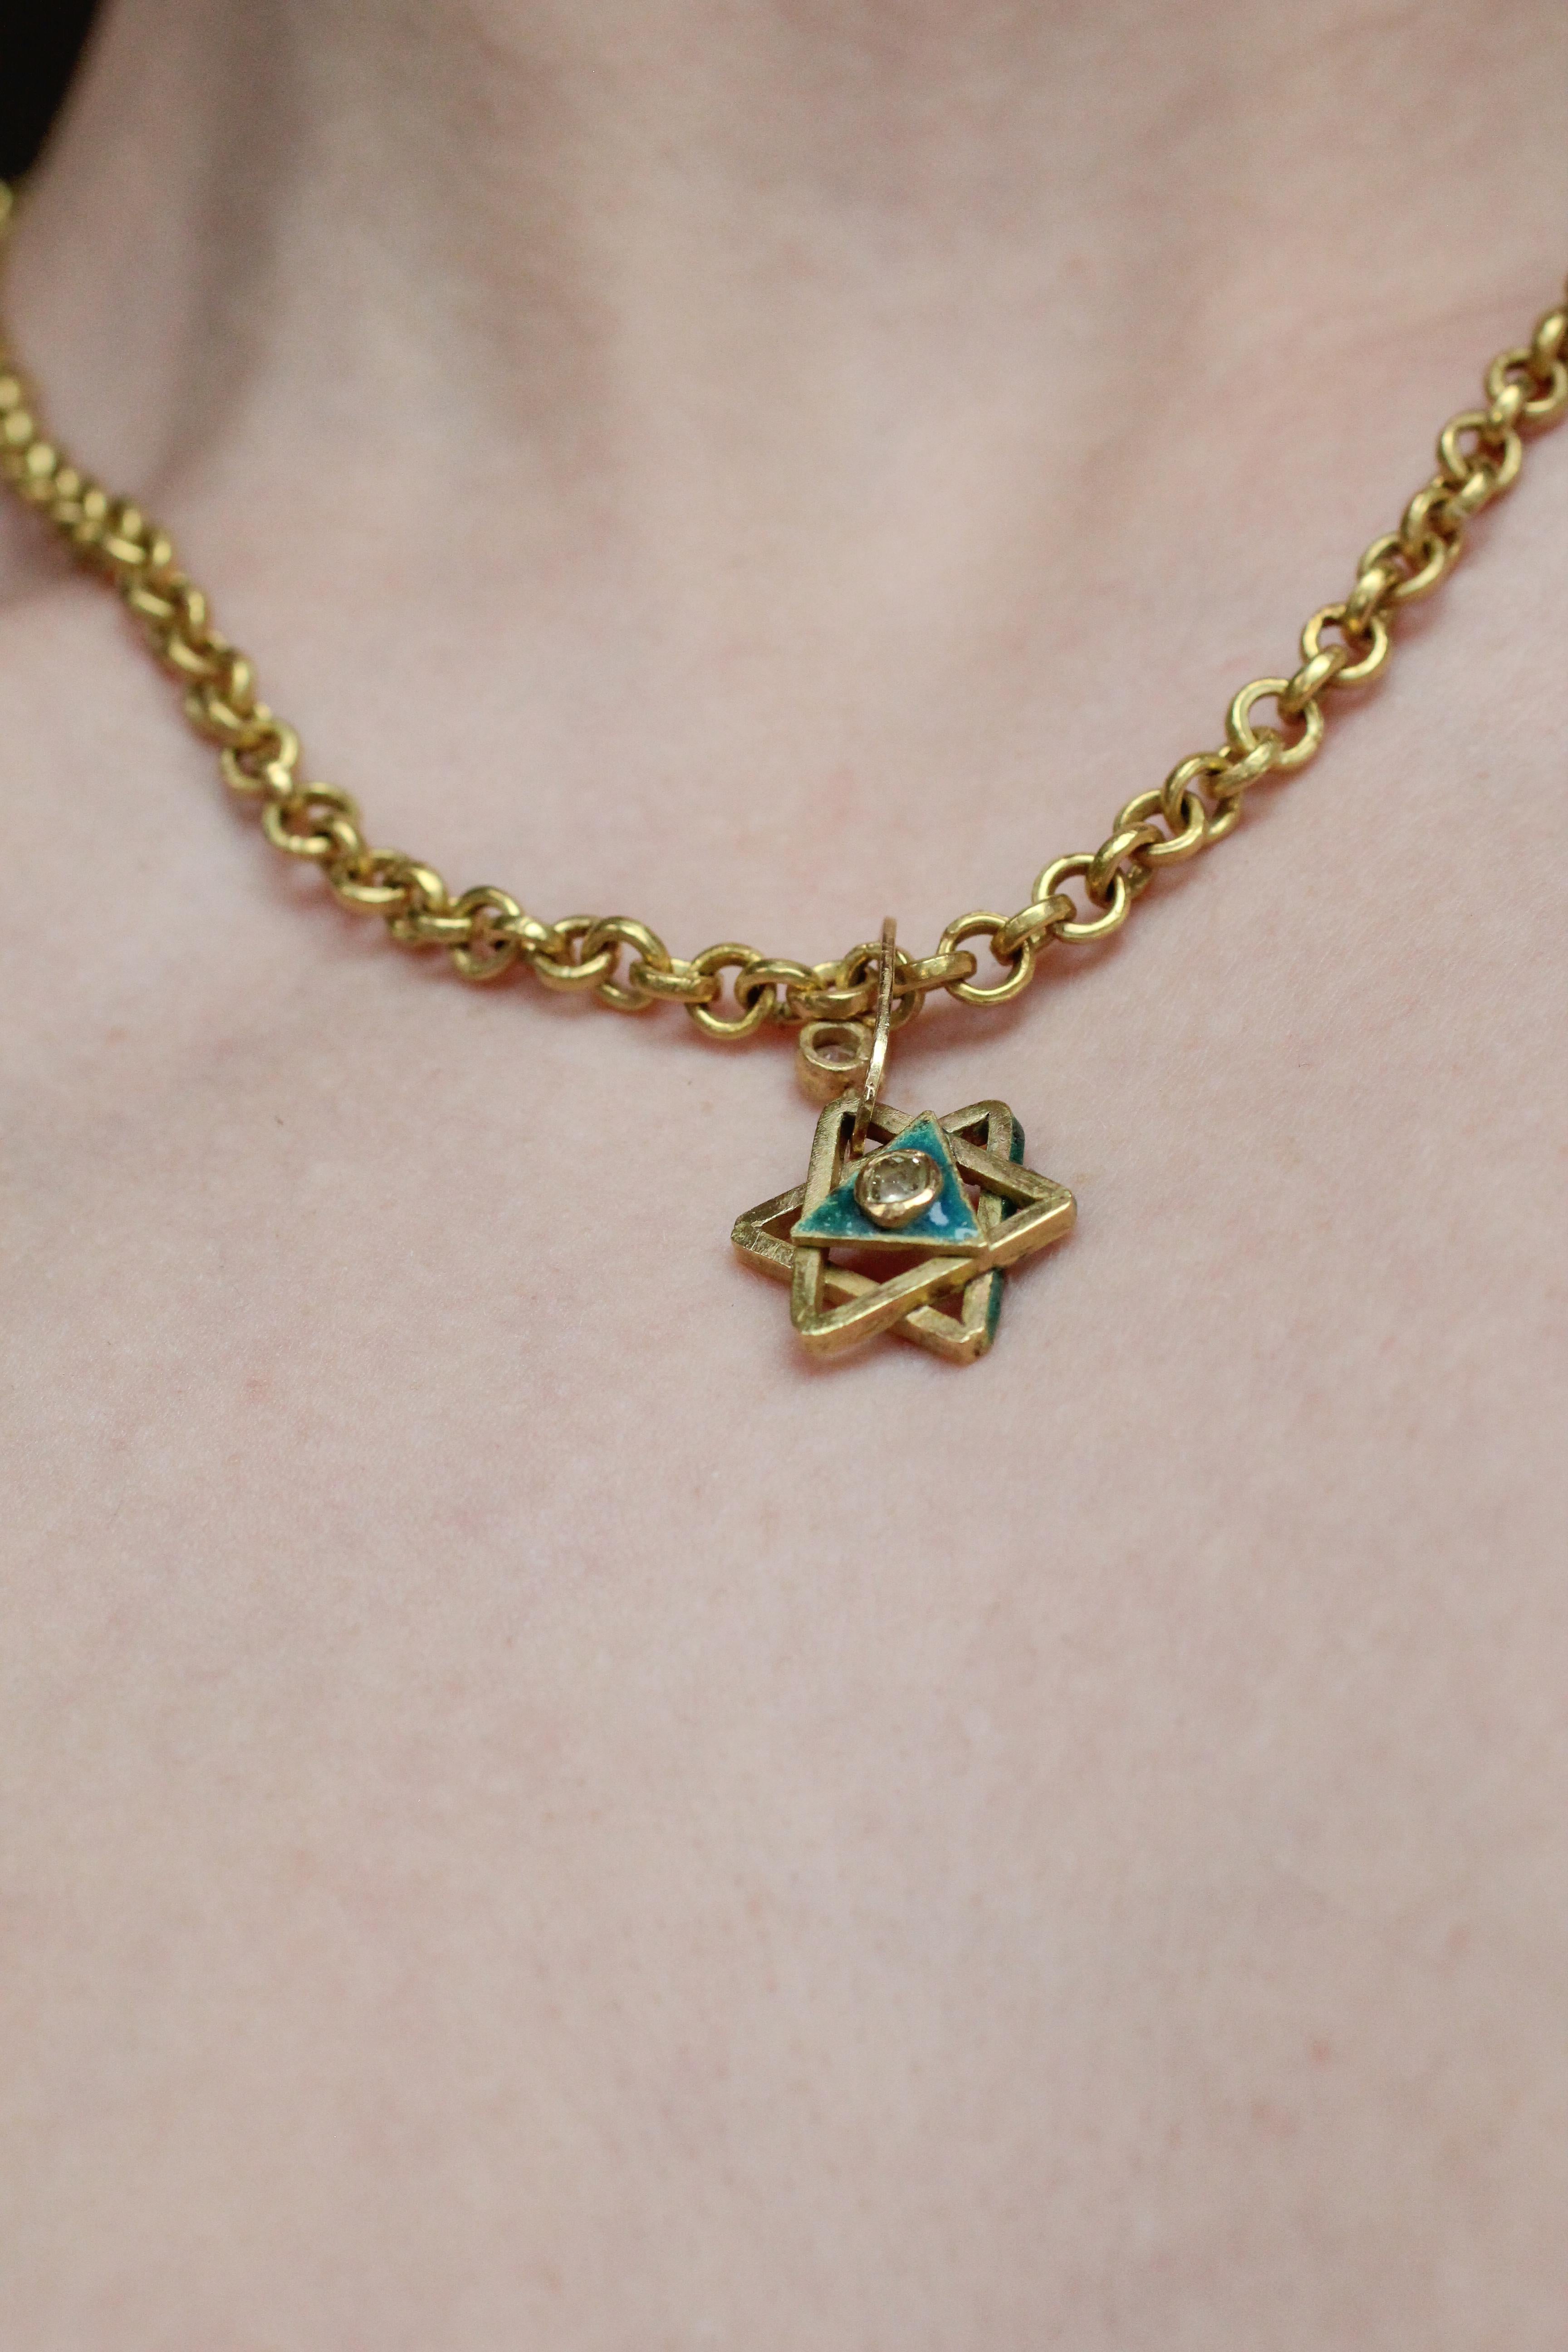 Enamel Magen David 18K Gold Chain Necklace Diamond Enhancer and Toggle Clasp For Sale 12